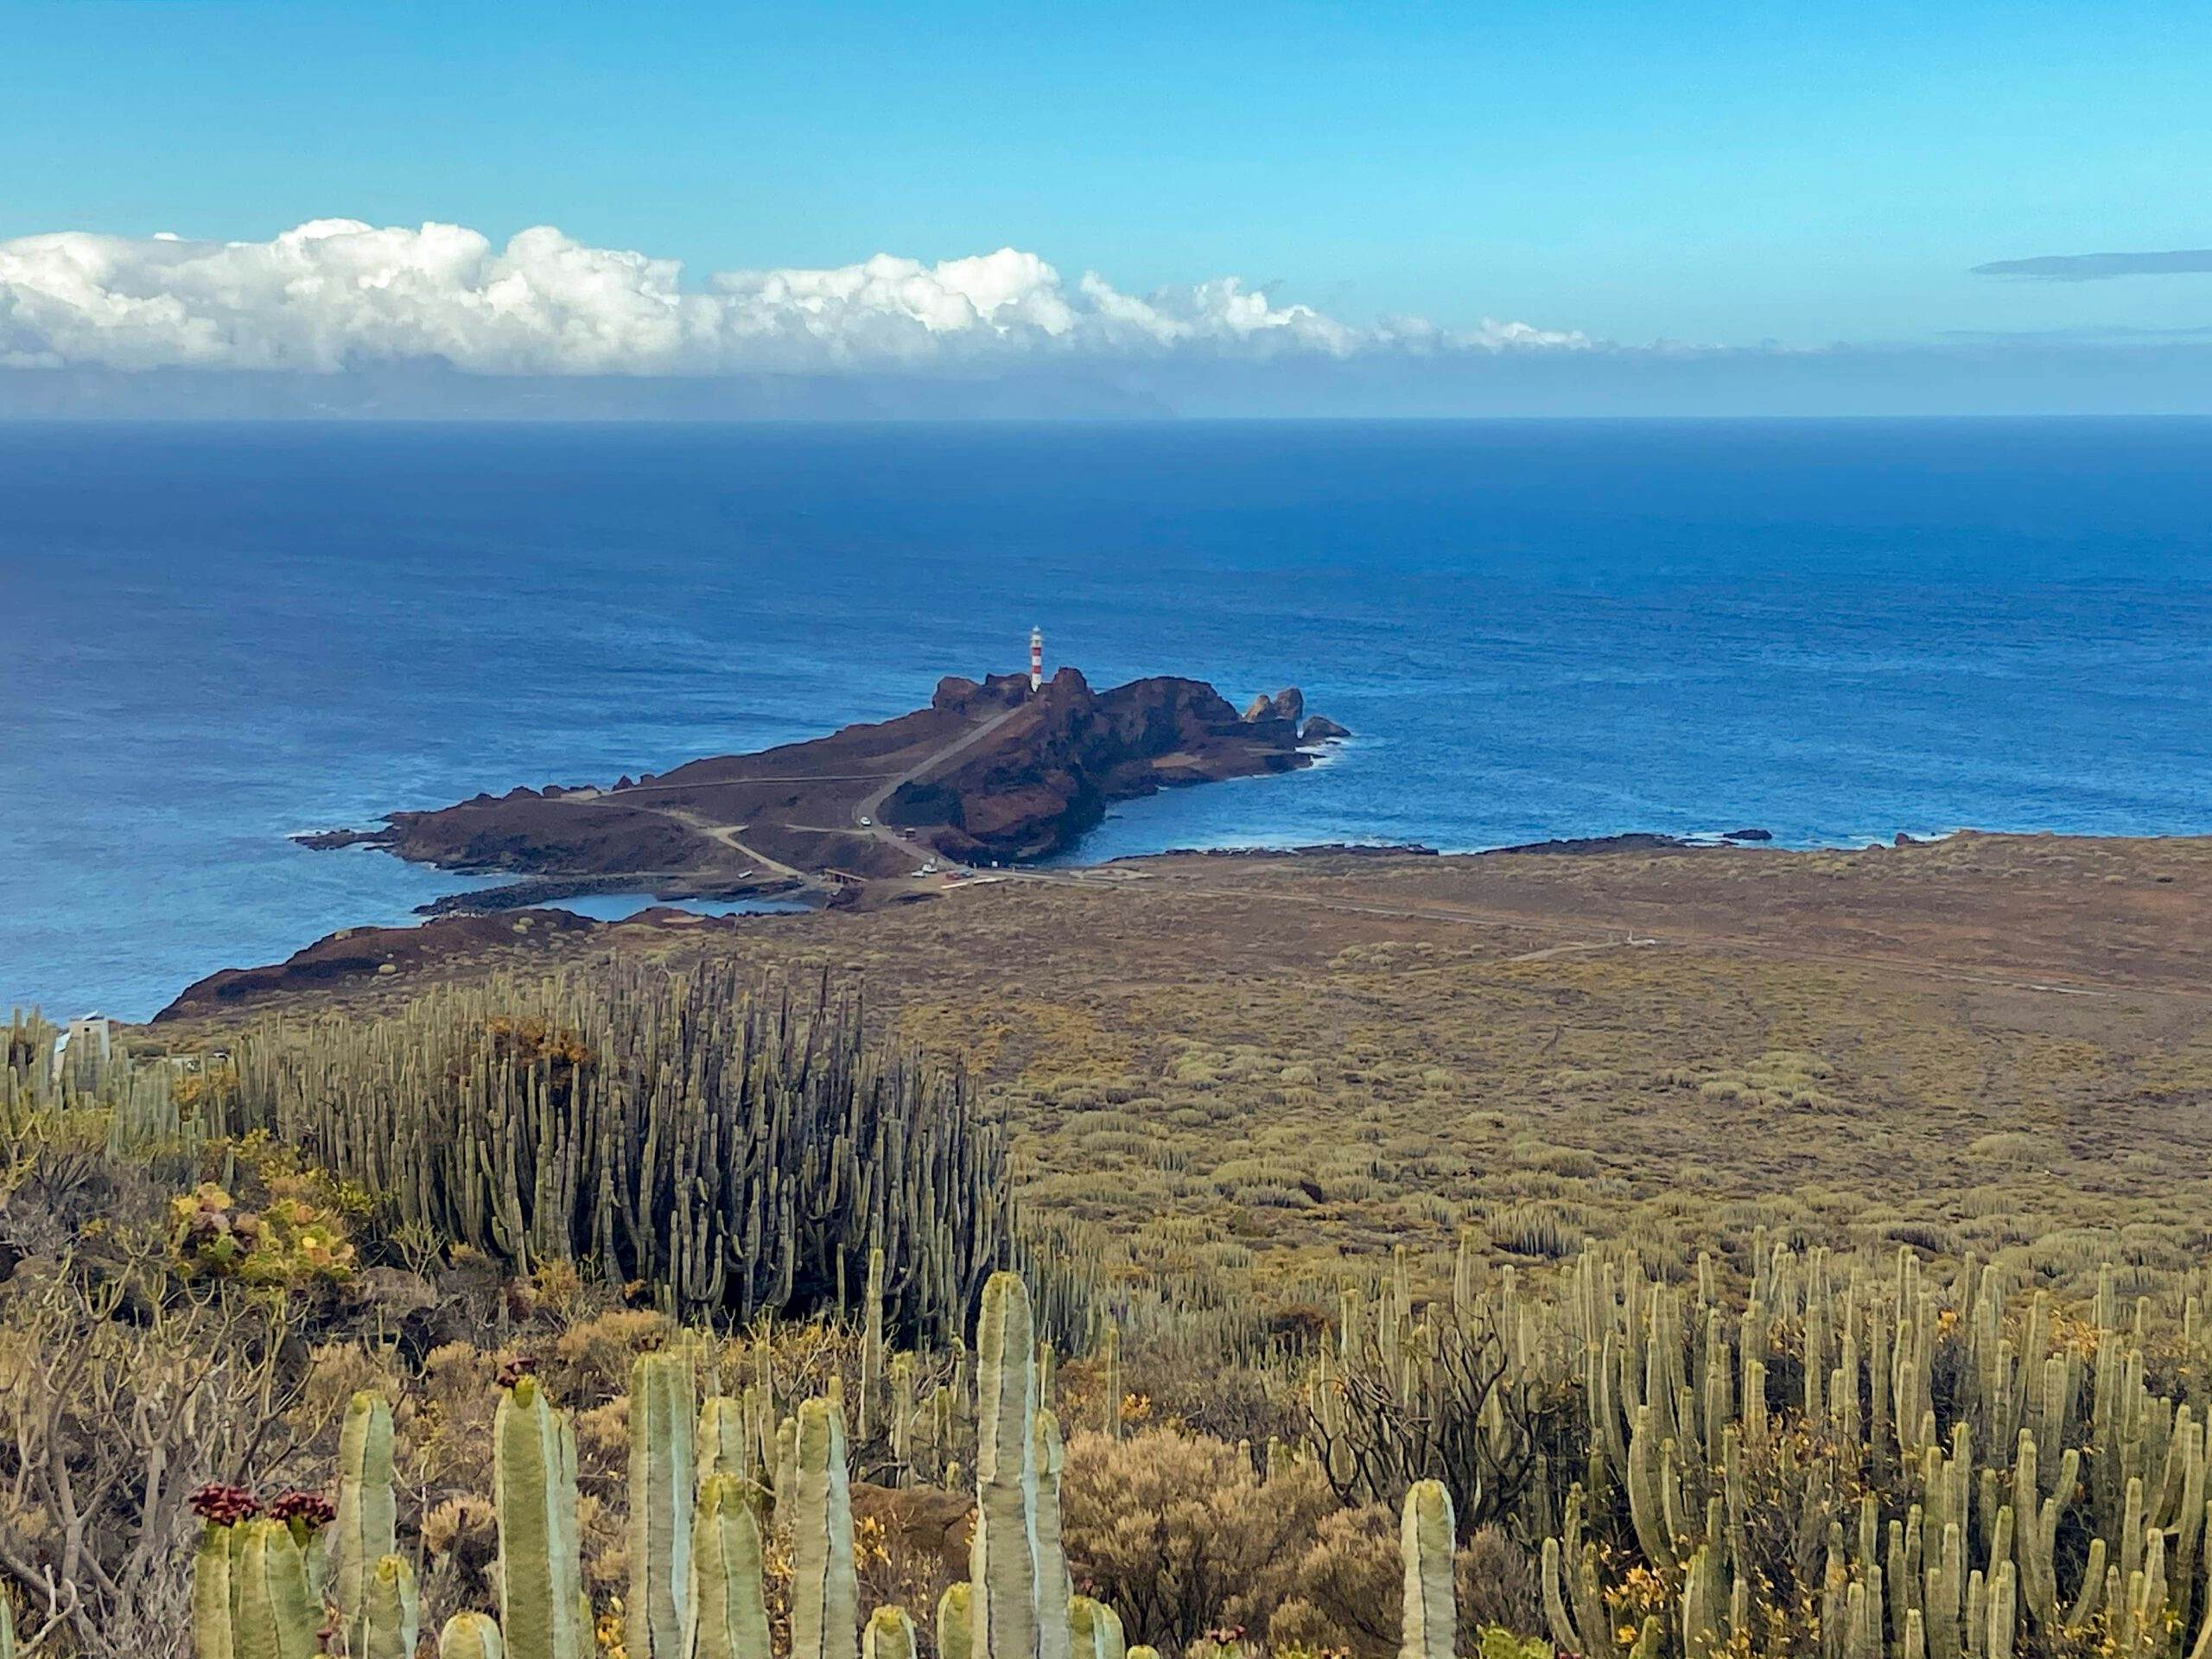 View of Punta Teno from the hiking trail